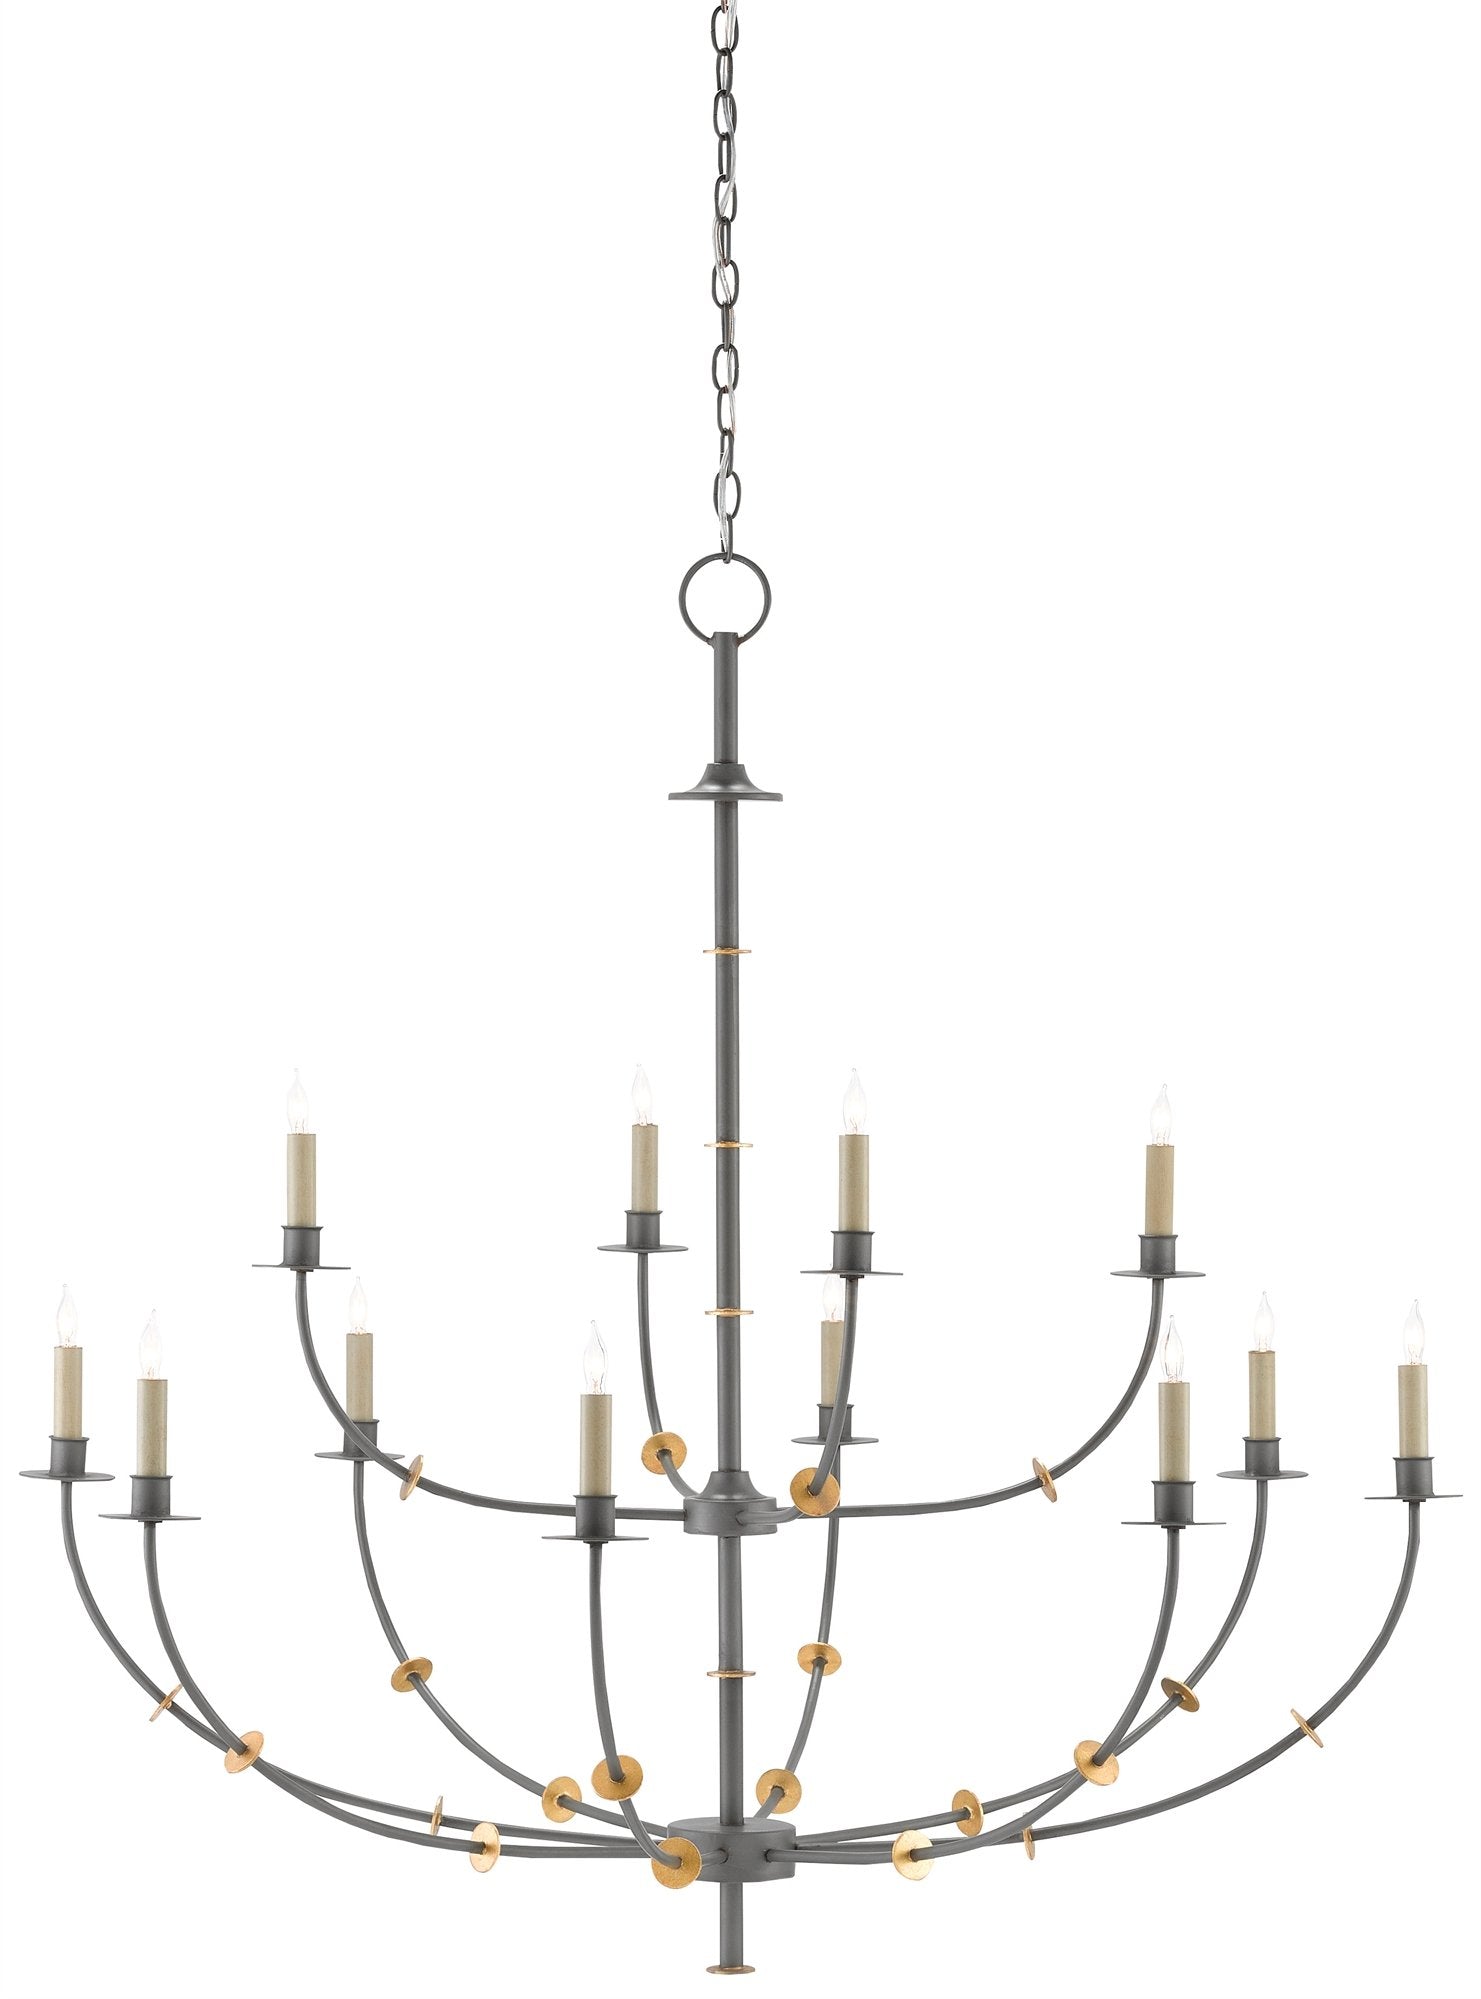 Balladier Chandelier design by Currey and Company